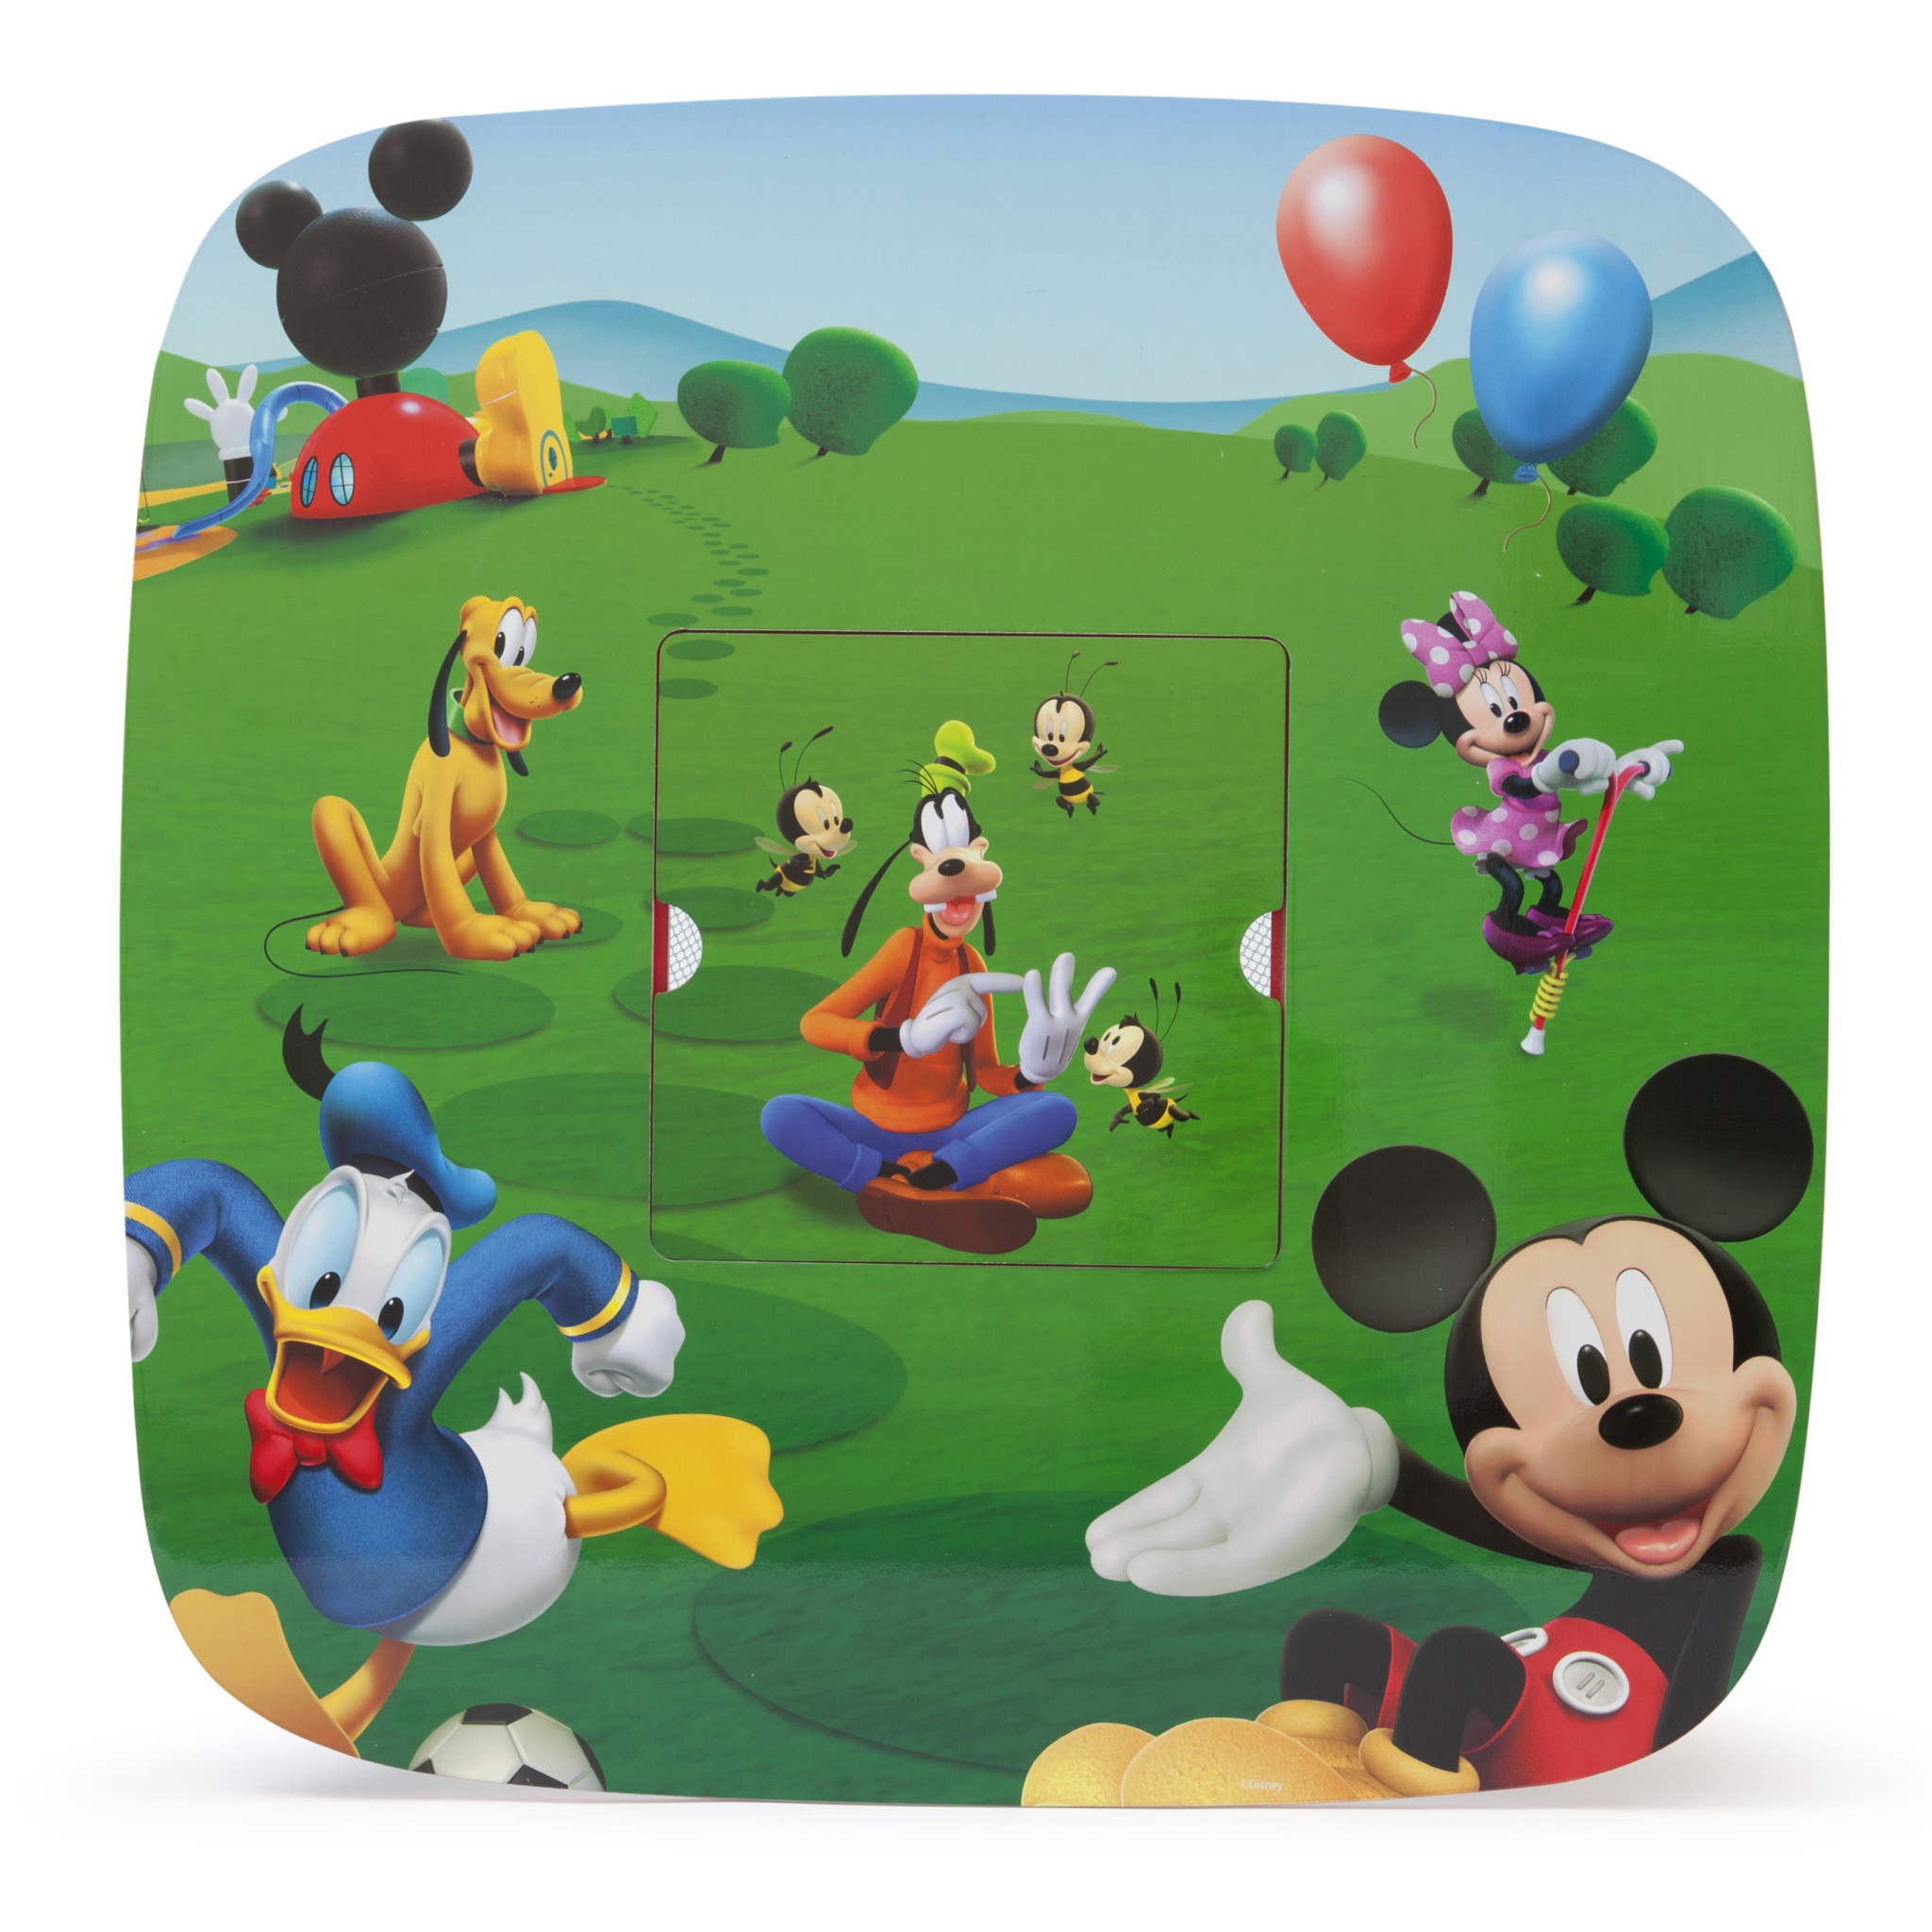 Disney Mickey Mouse Wood Kids Storage Table and Chairs Set by Delta Children - image 3 of 5